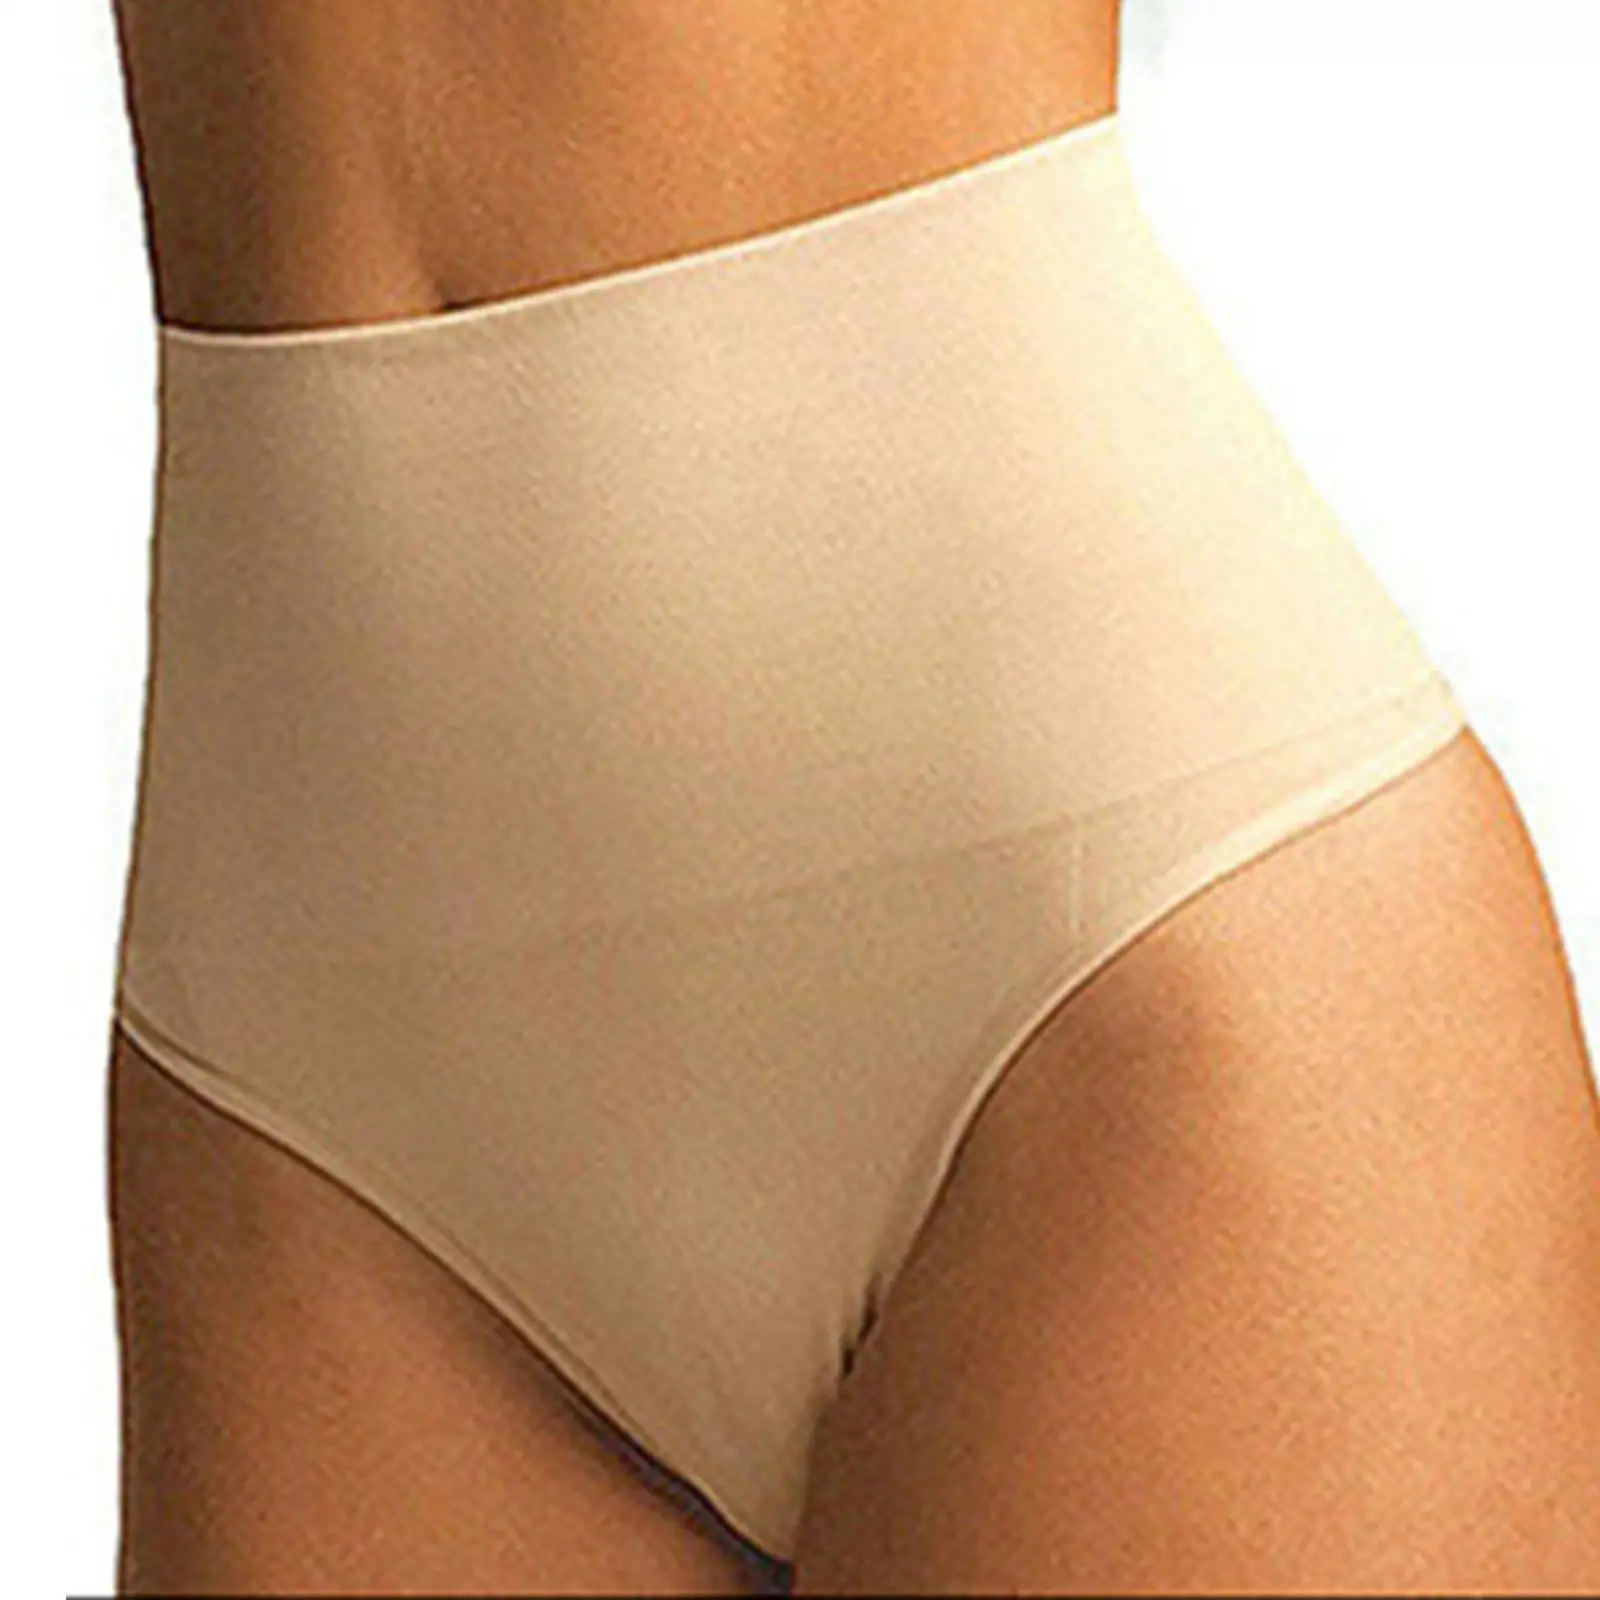 Mid Waist Women wear, Lifting Shaping Pants Trimmer Thong Panties Girl Soft Panties for Exercise Wedding